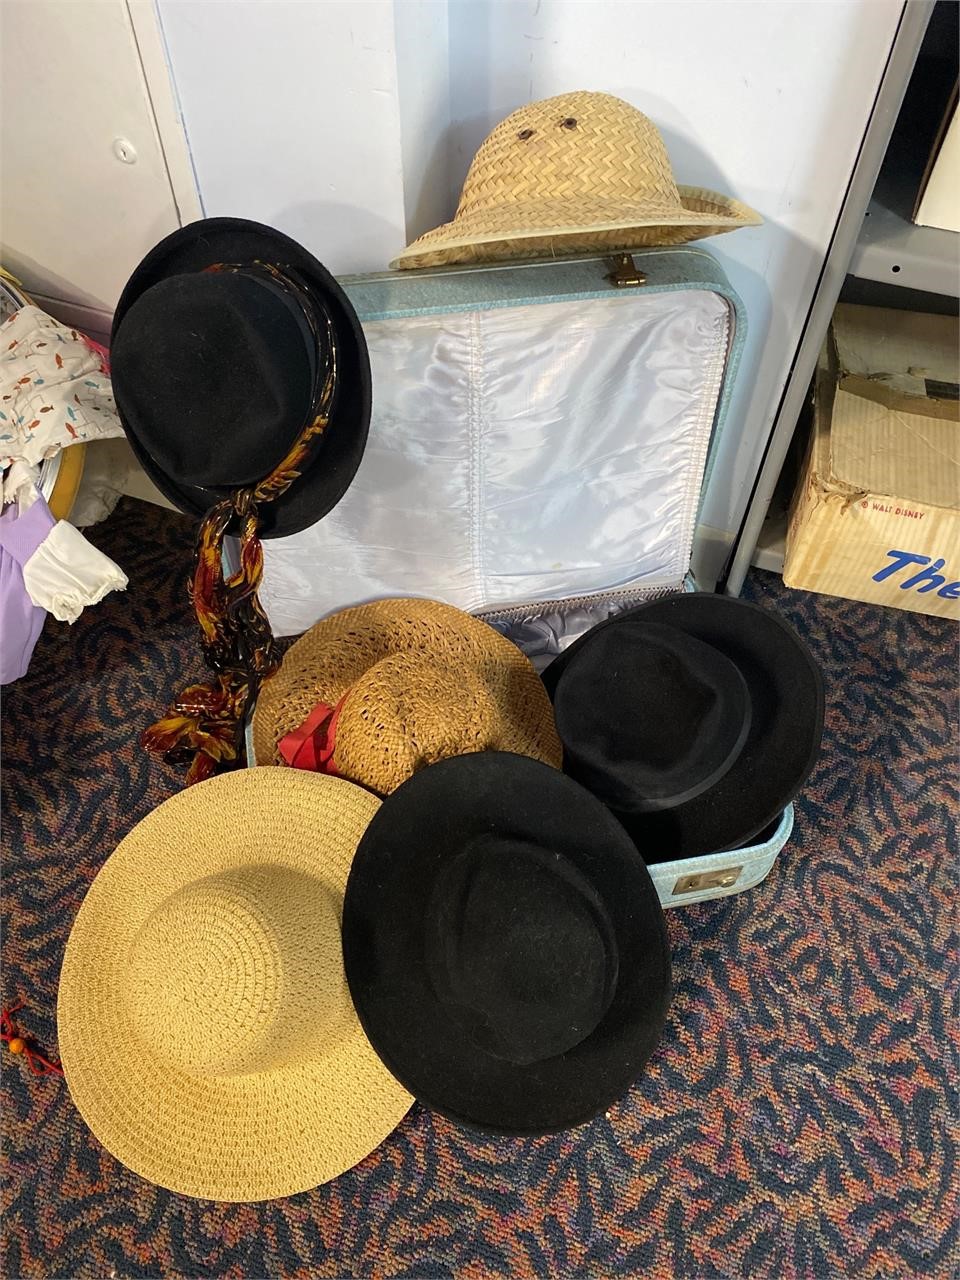 Vintage Hats and Suitcase